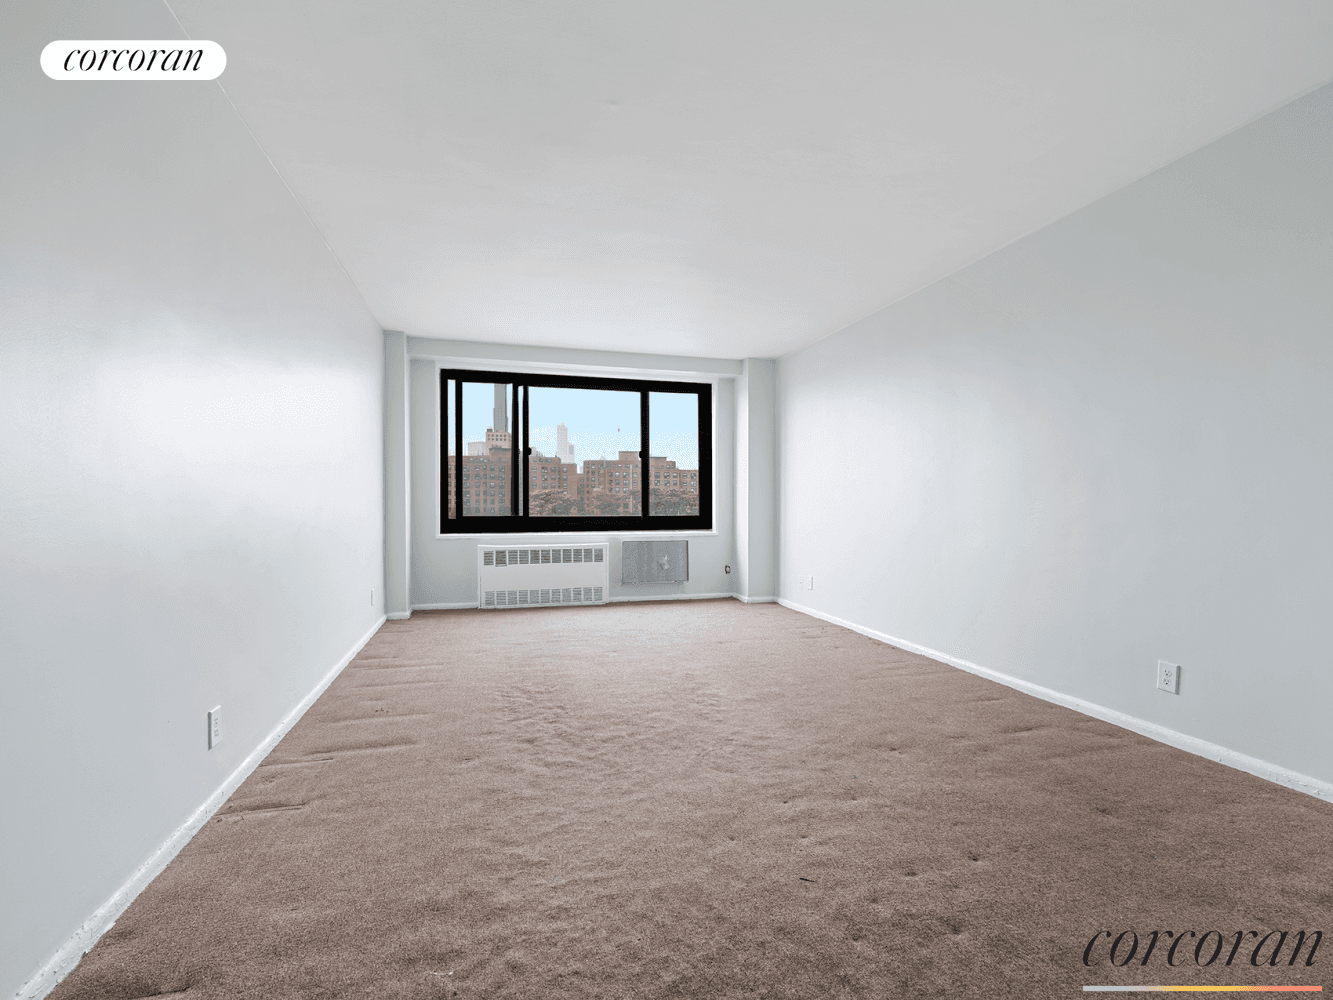 Best Priced Blank canvas this is a well configured one bedroom in a Clinton Hill Coop on a high floor with great city views and wonderful sunsets.